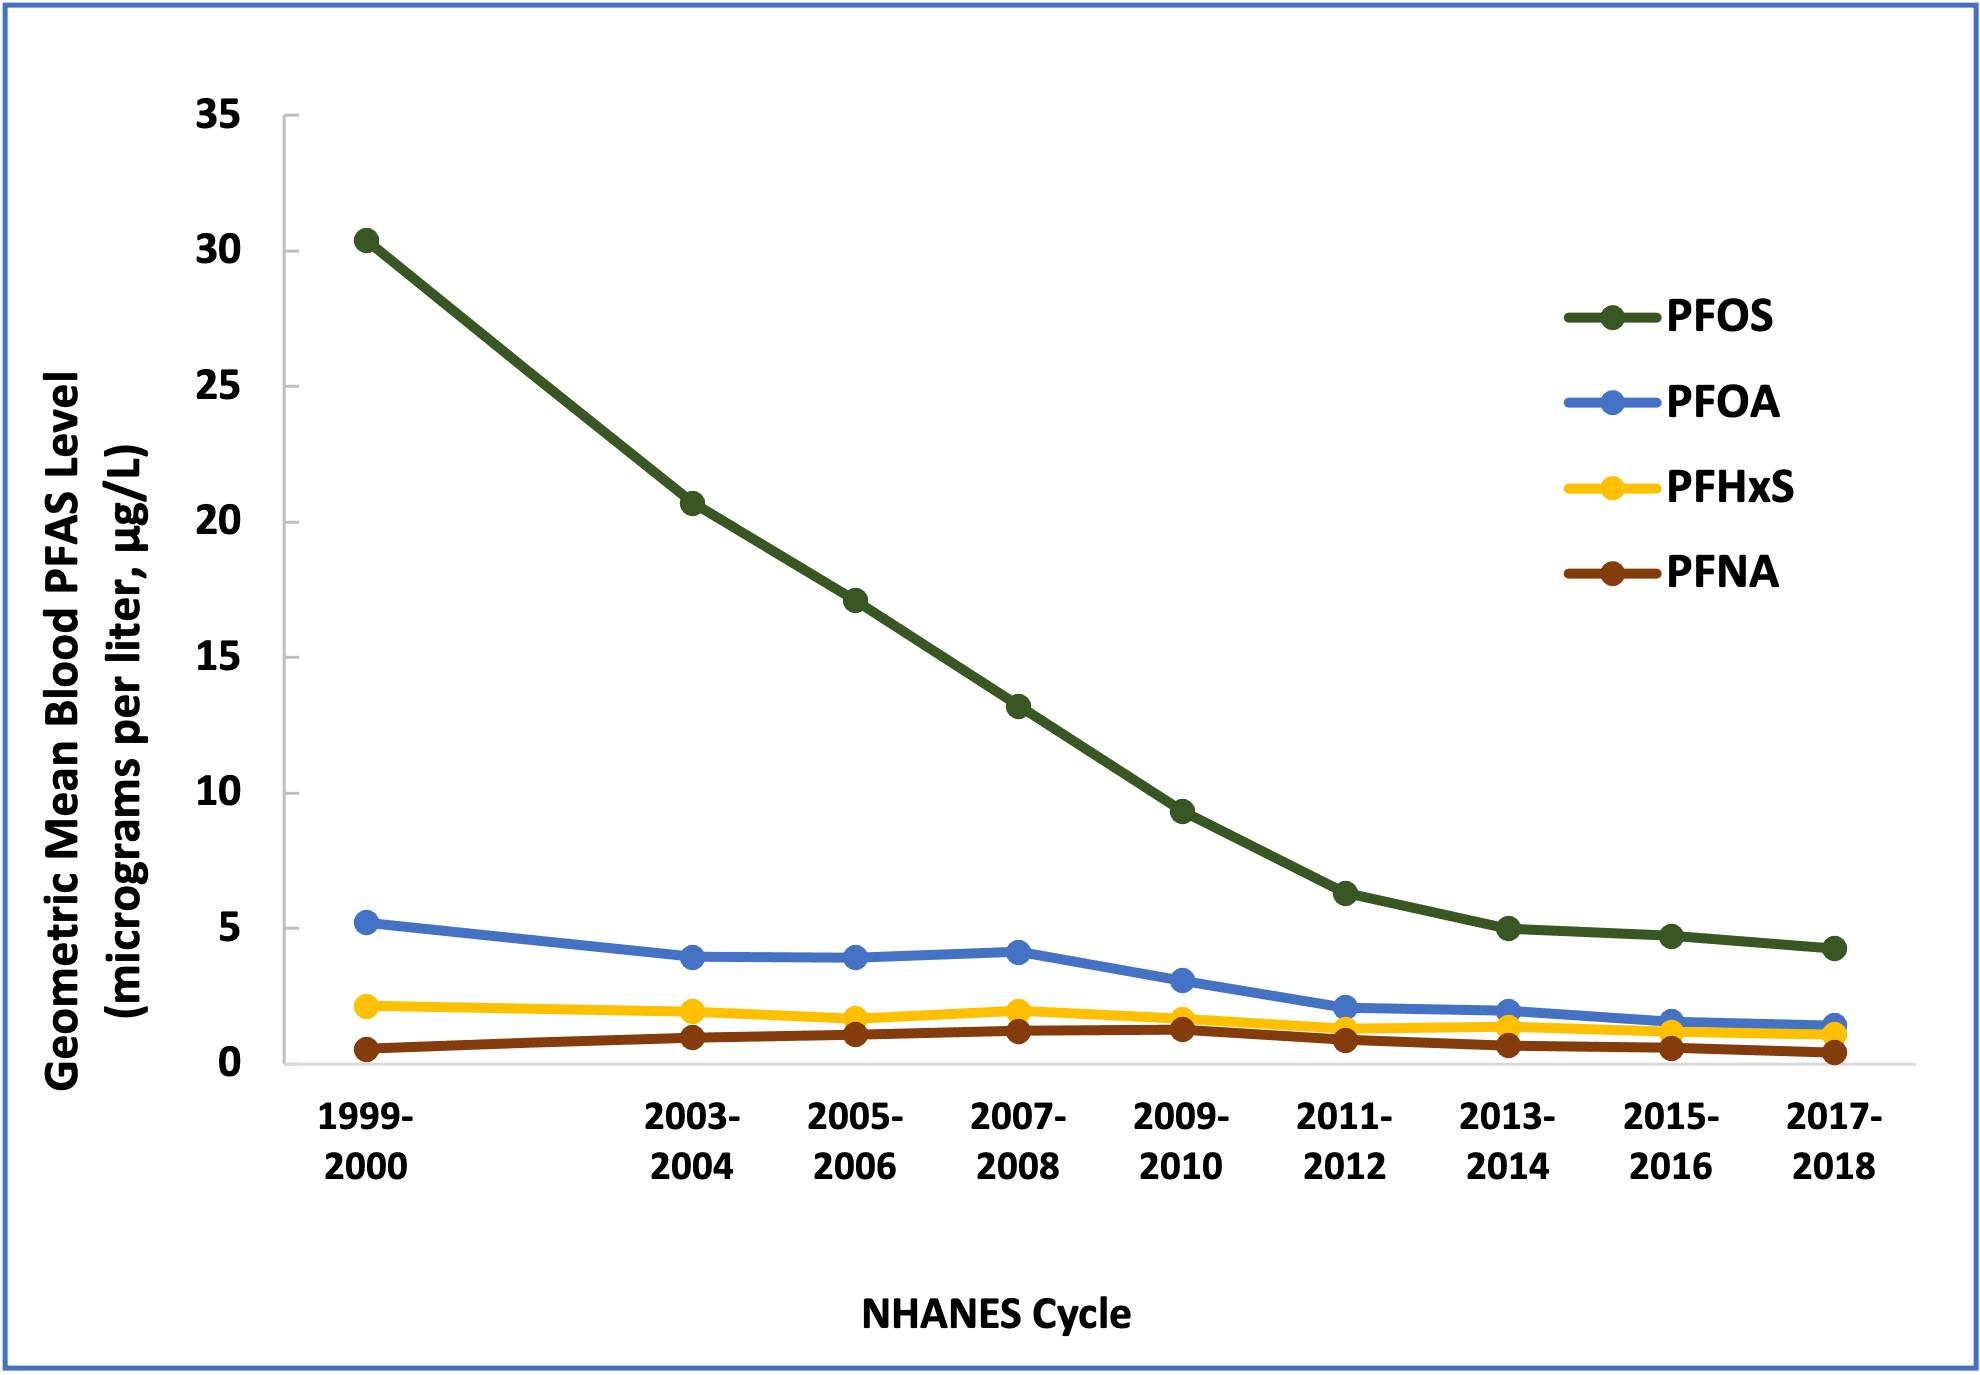 Chart shows declining average blood levels of PFOS, PFOA, PFHxS, and PFNA in the U.S. from NHANES cycle 1999-2000 to 2017-2018.